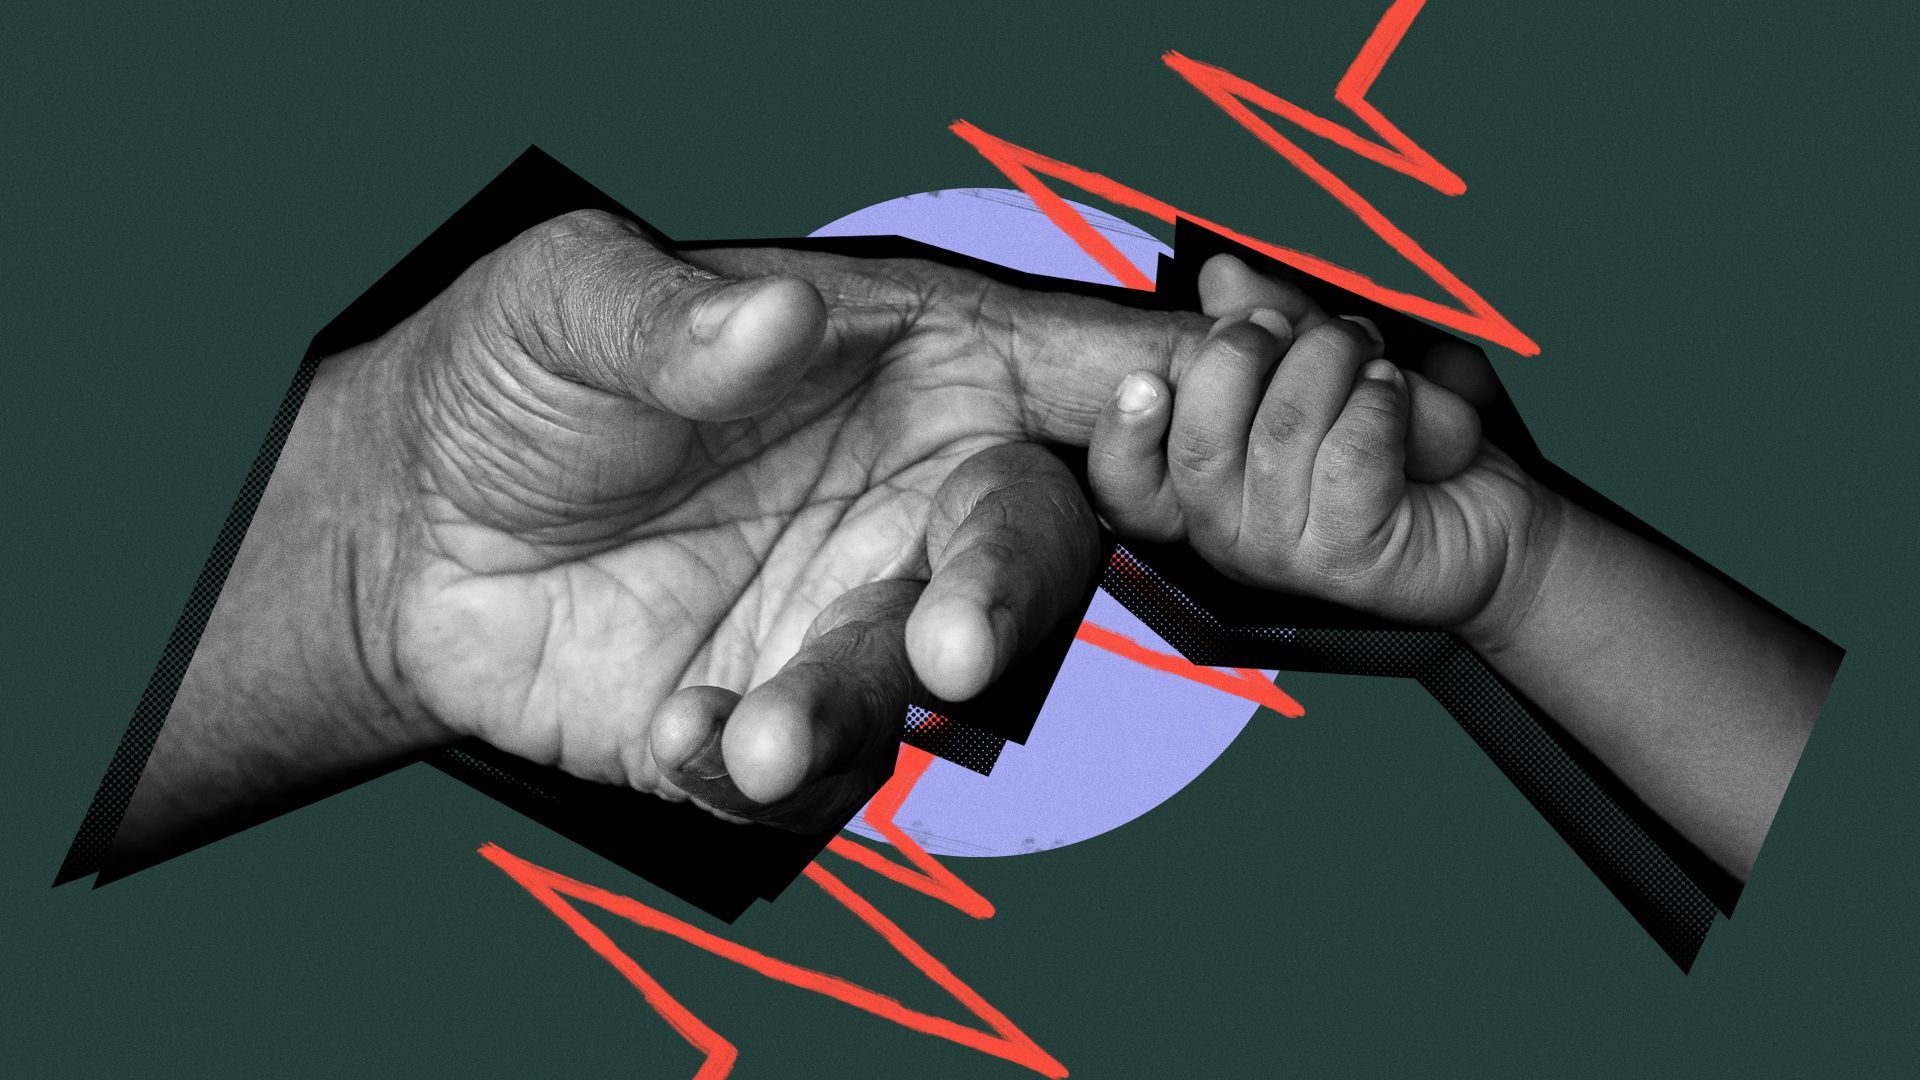 Illustration of a baby's hand holding an elderly hand, with a circle and an EKG-like line in the background